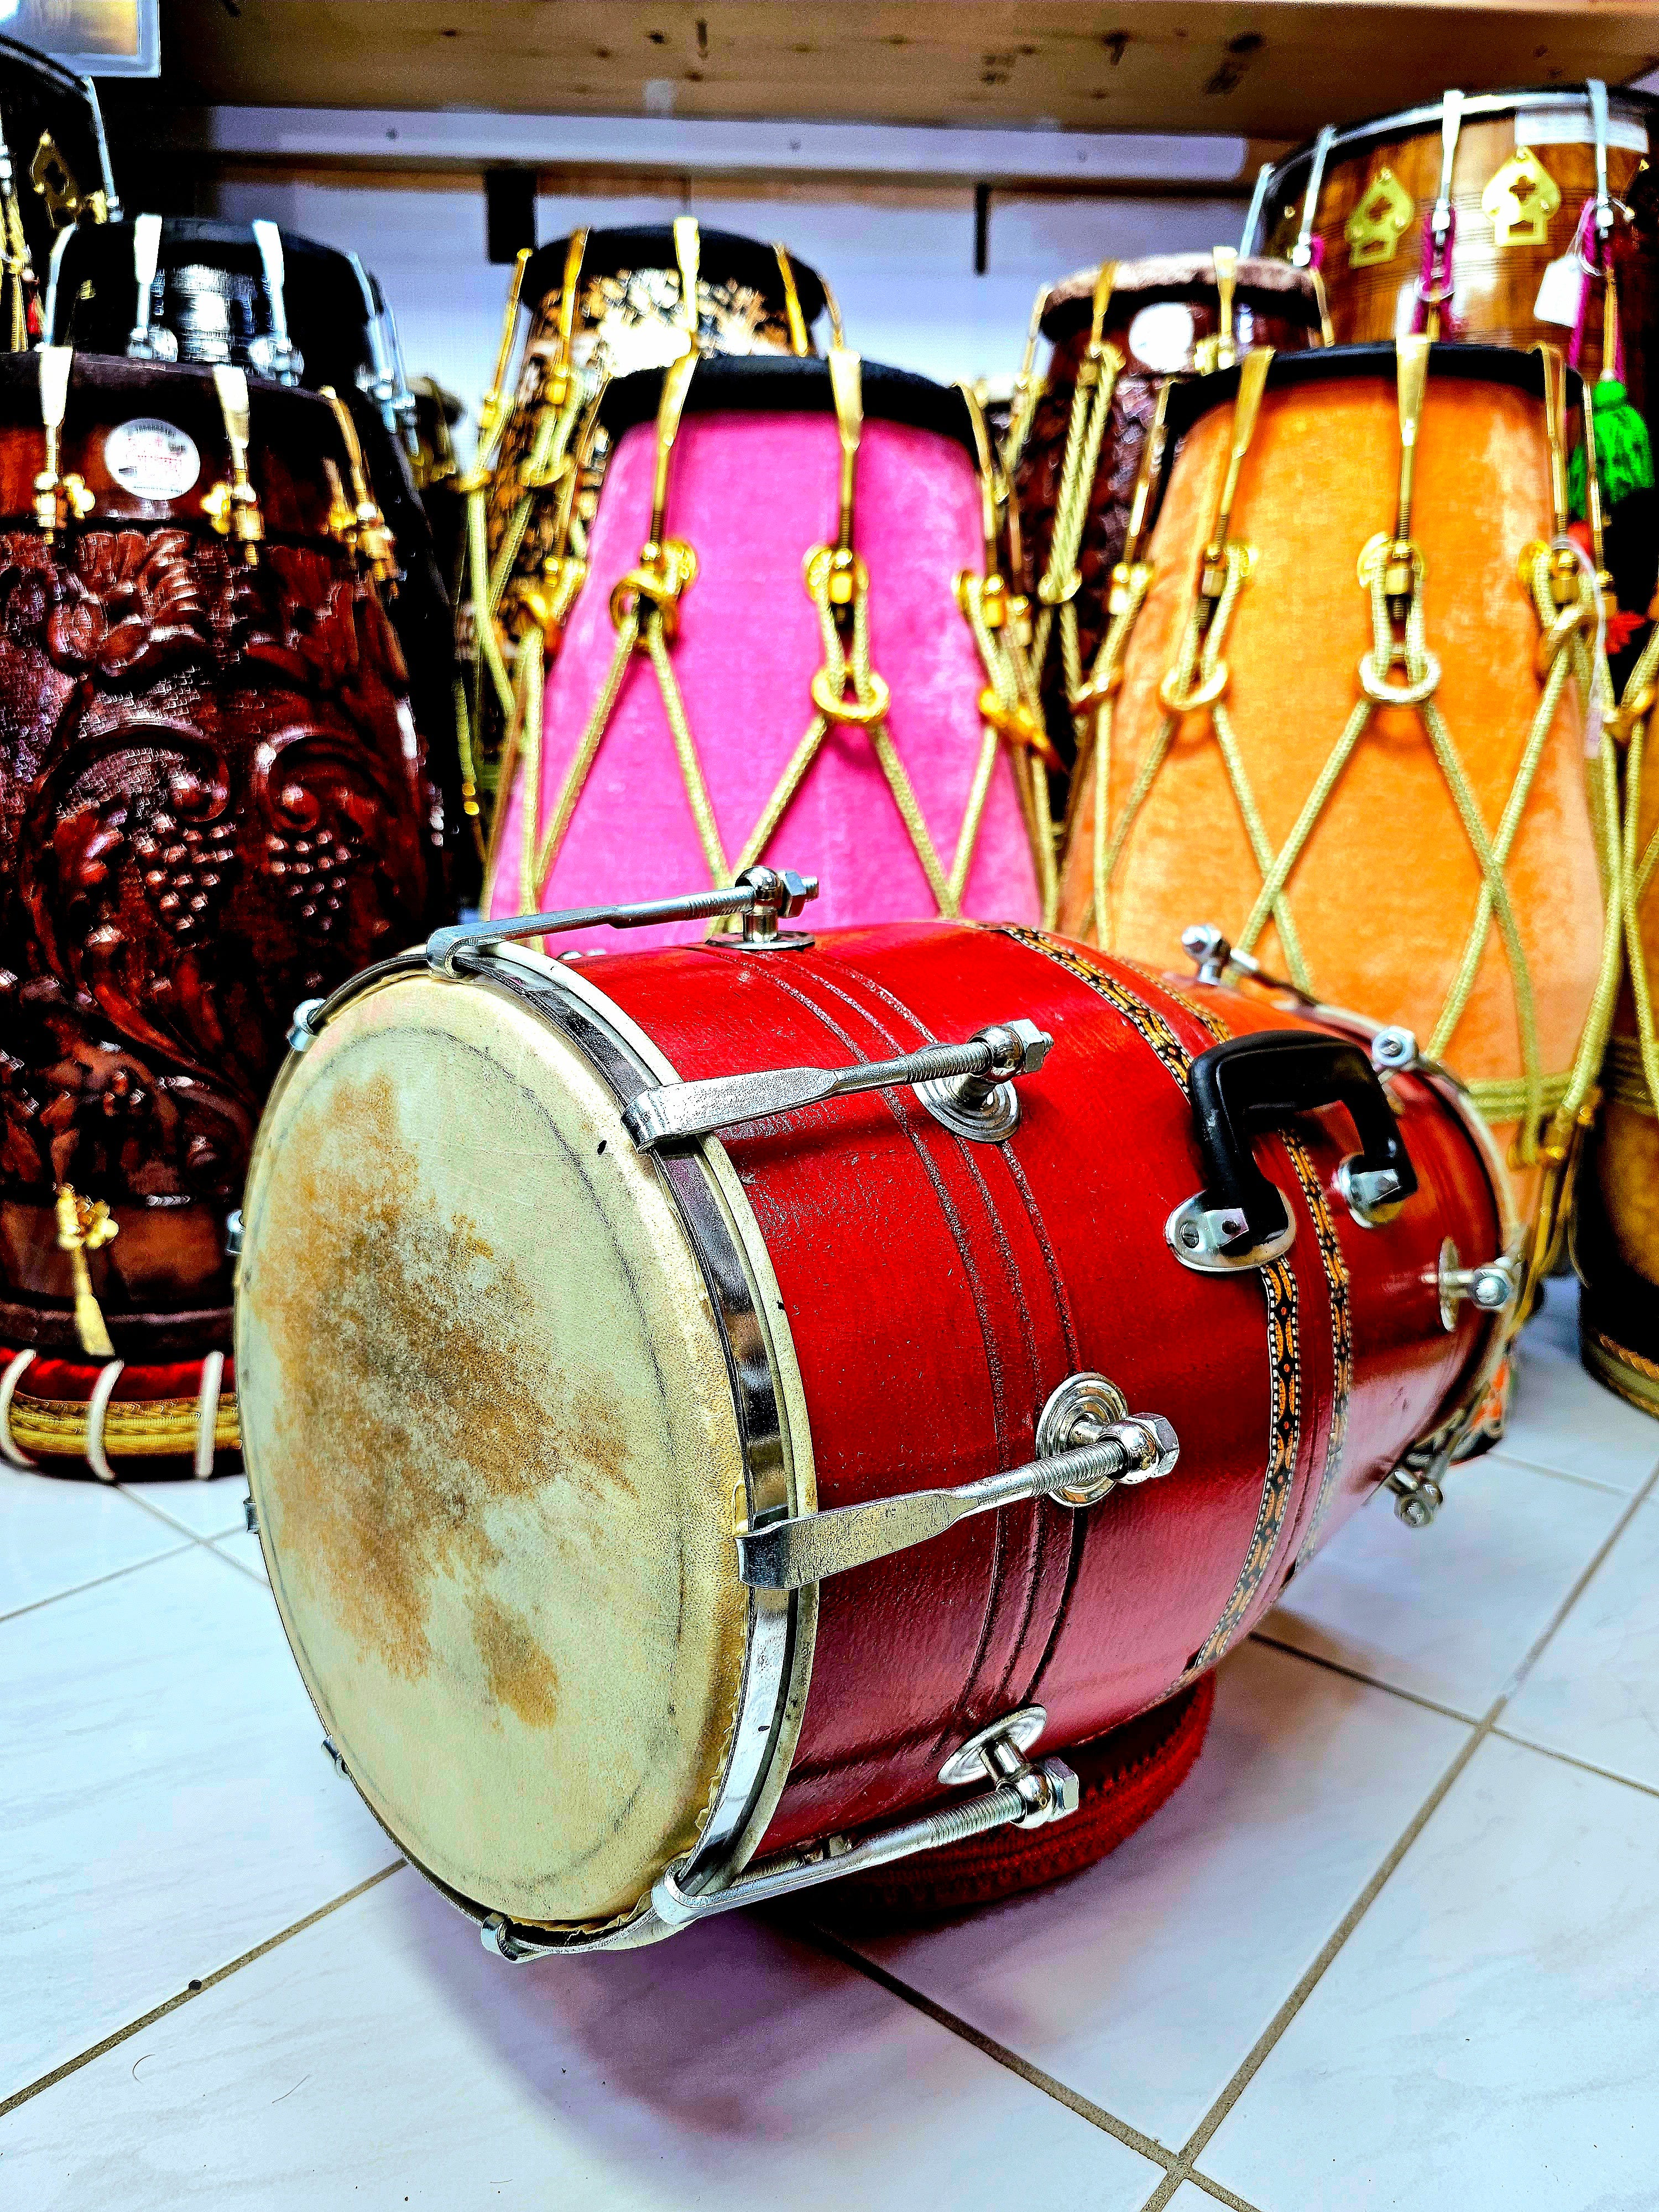 Crimson Cadence: Red Student Quality Dholak with Chrome Bolts, Metal Rim, and Handle